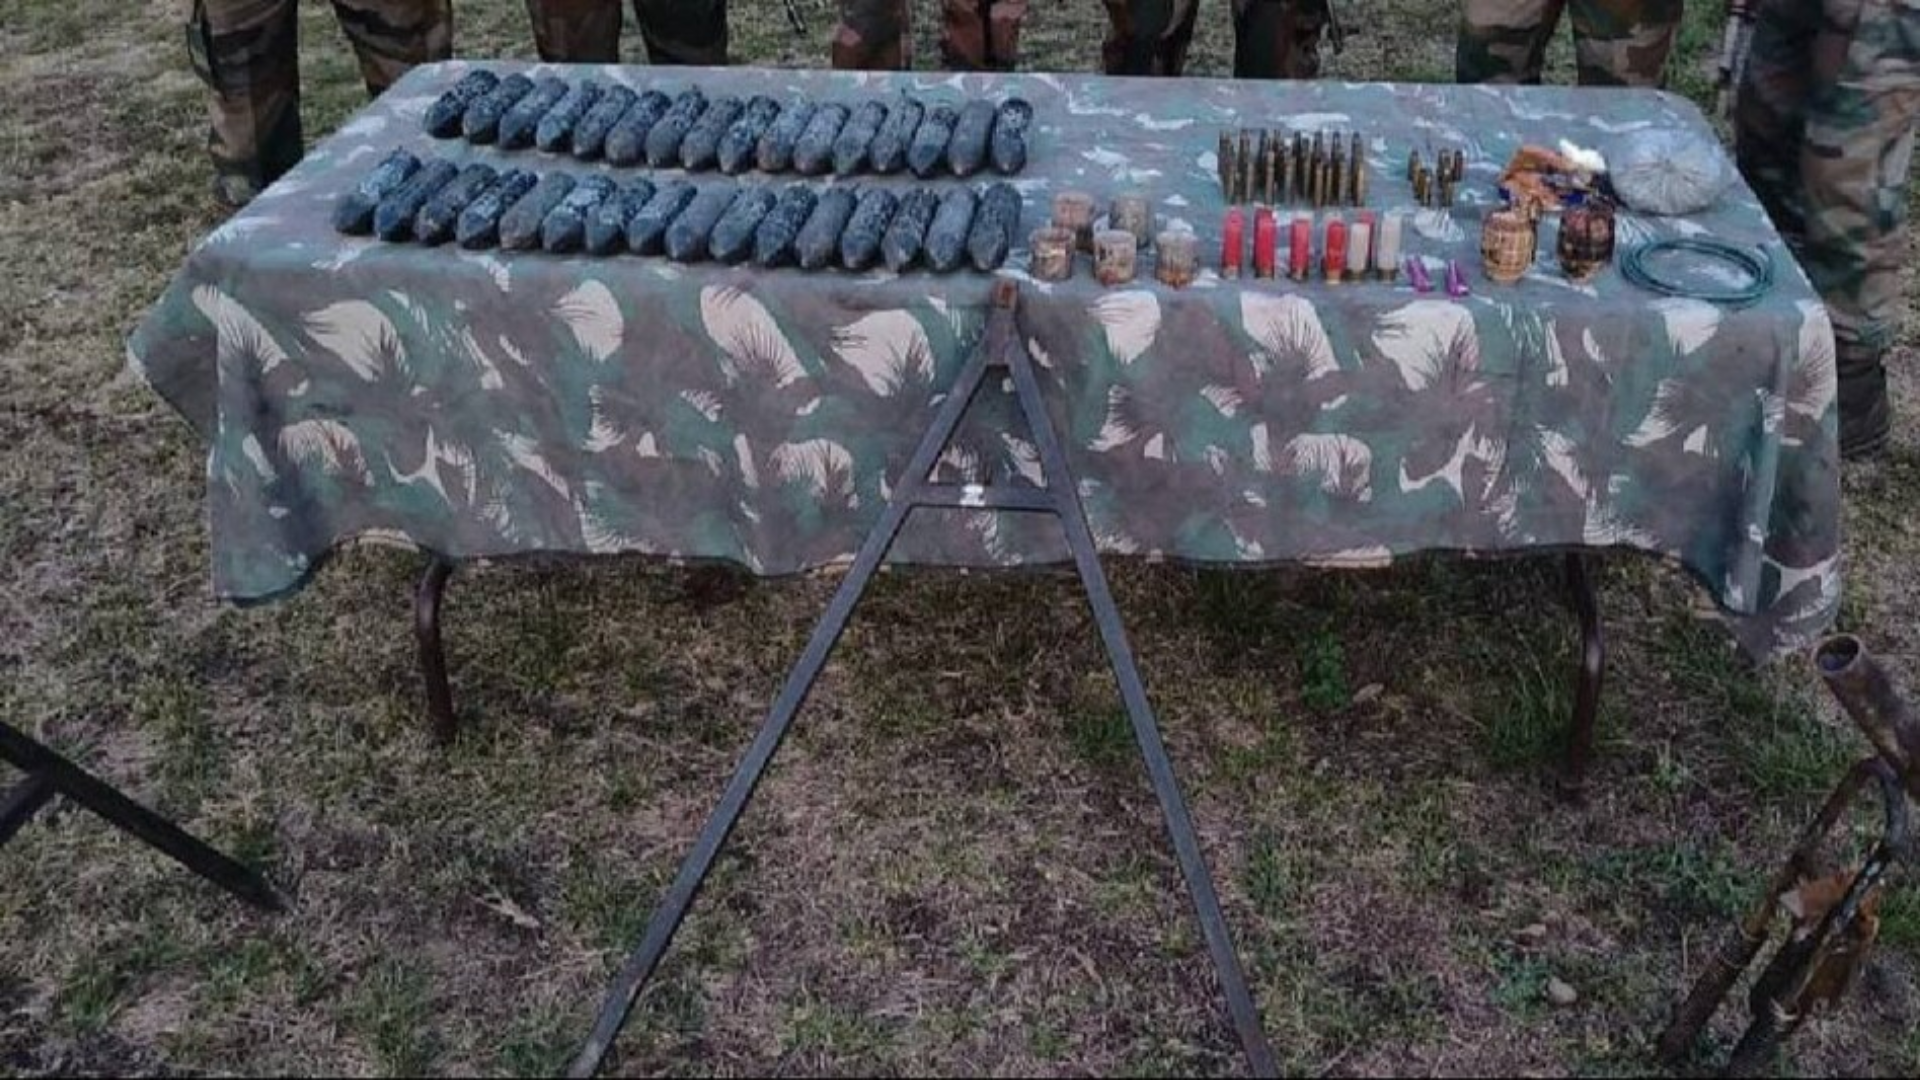 Security Forces in Manipur Conduct Search Operations, Recover Cache of Arms and Ammunition in Hill and Valley Districts